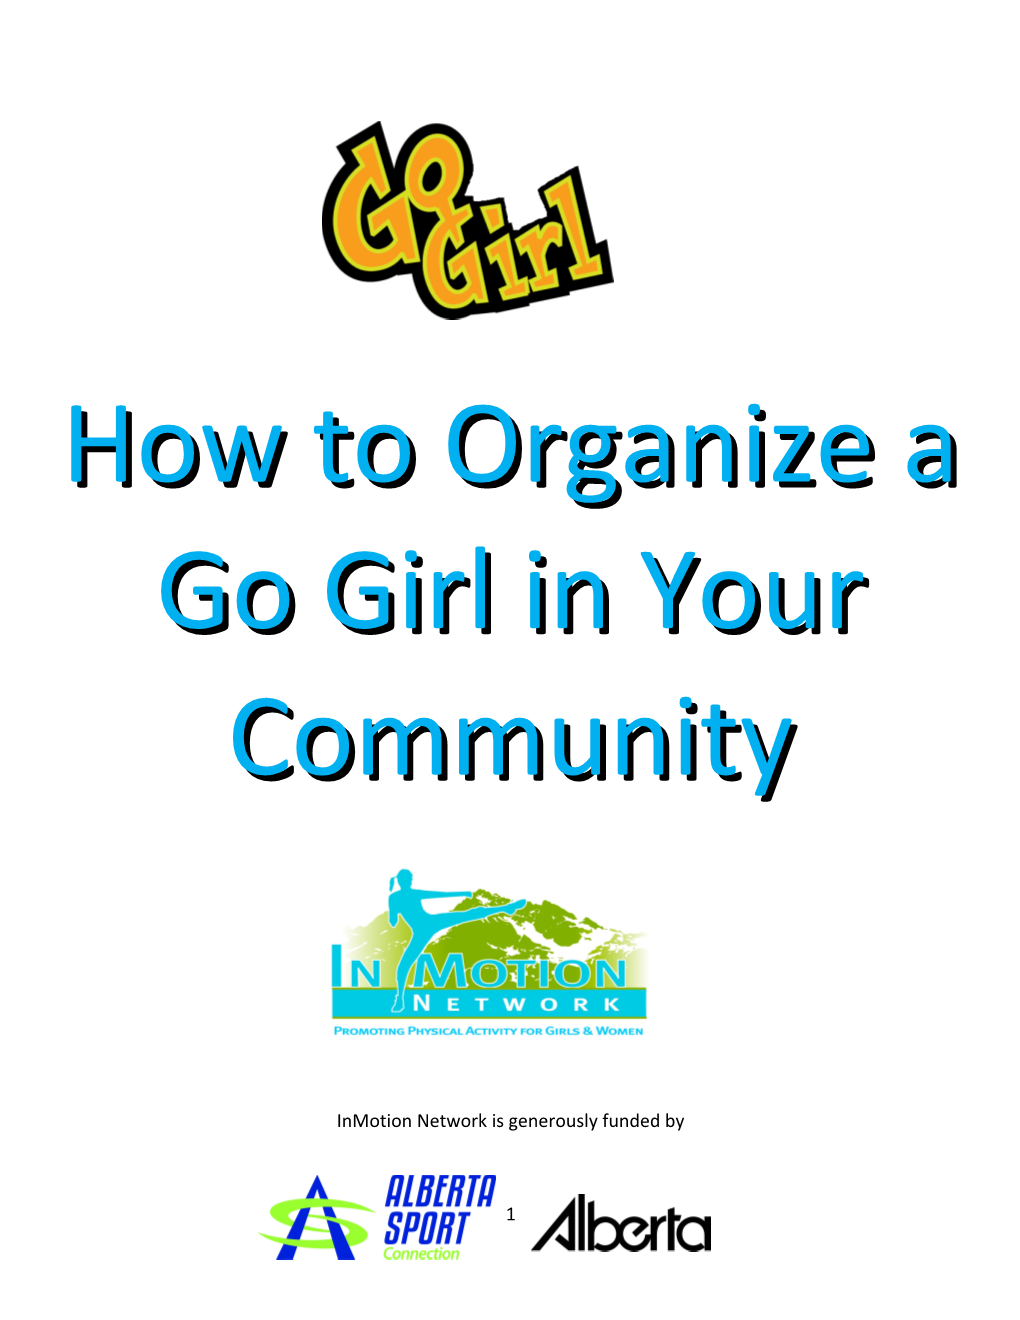 How to Organize a Go Girl in Your Community